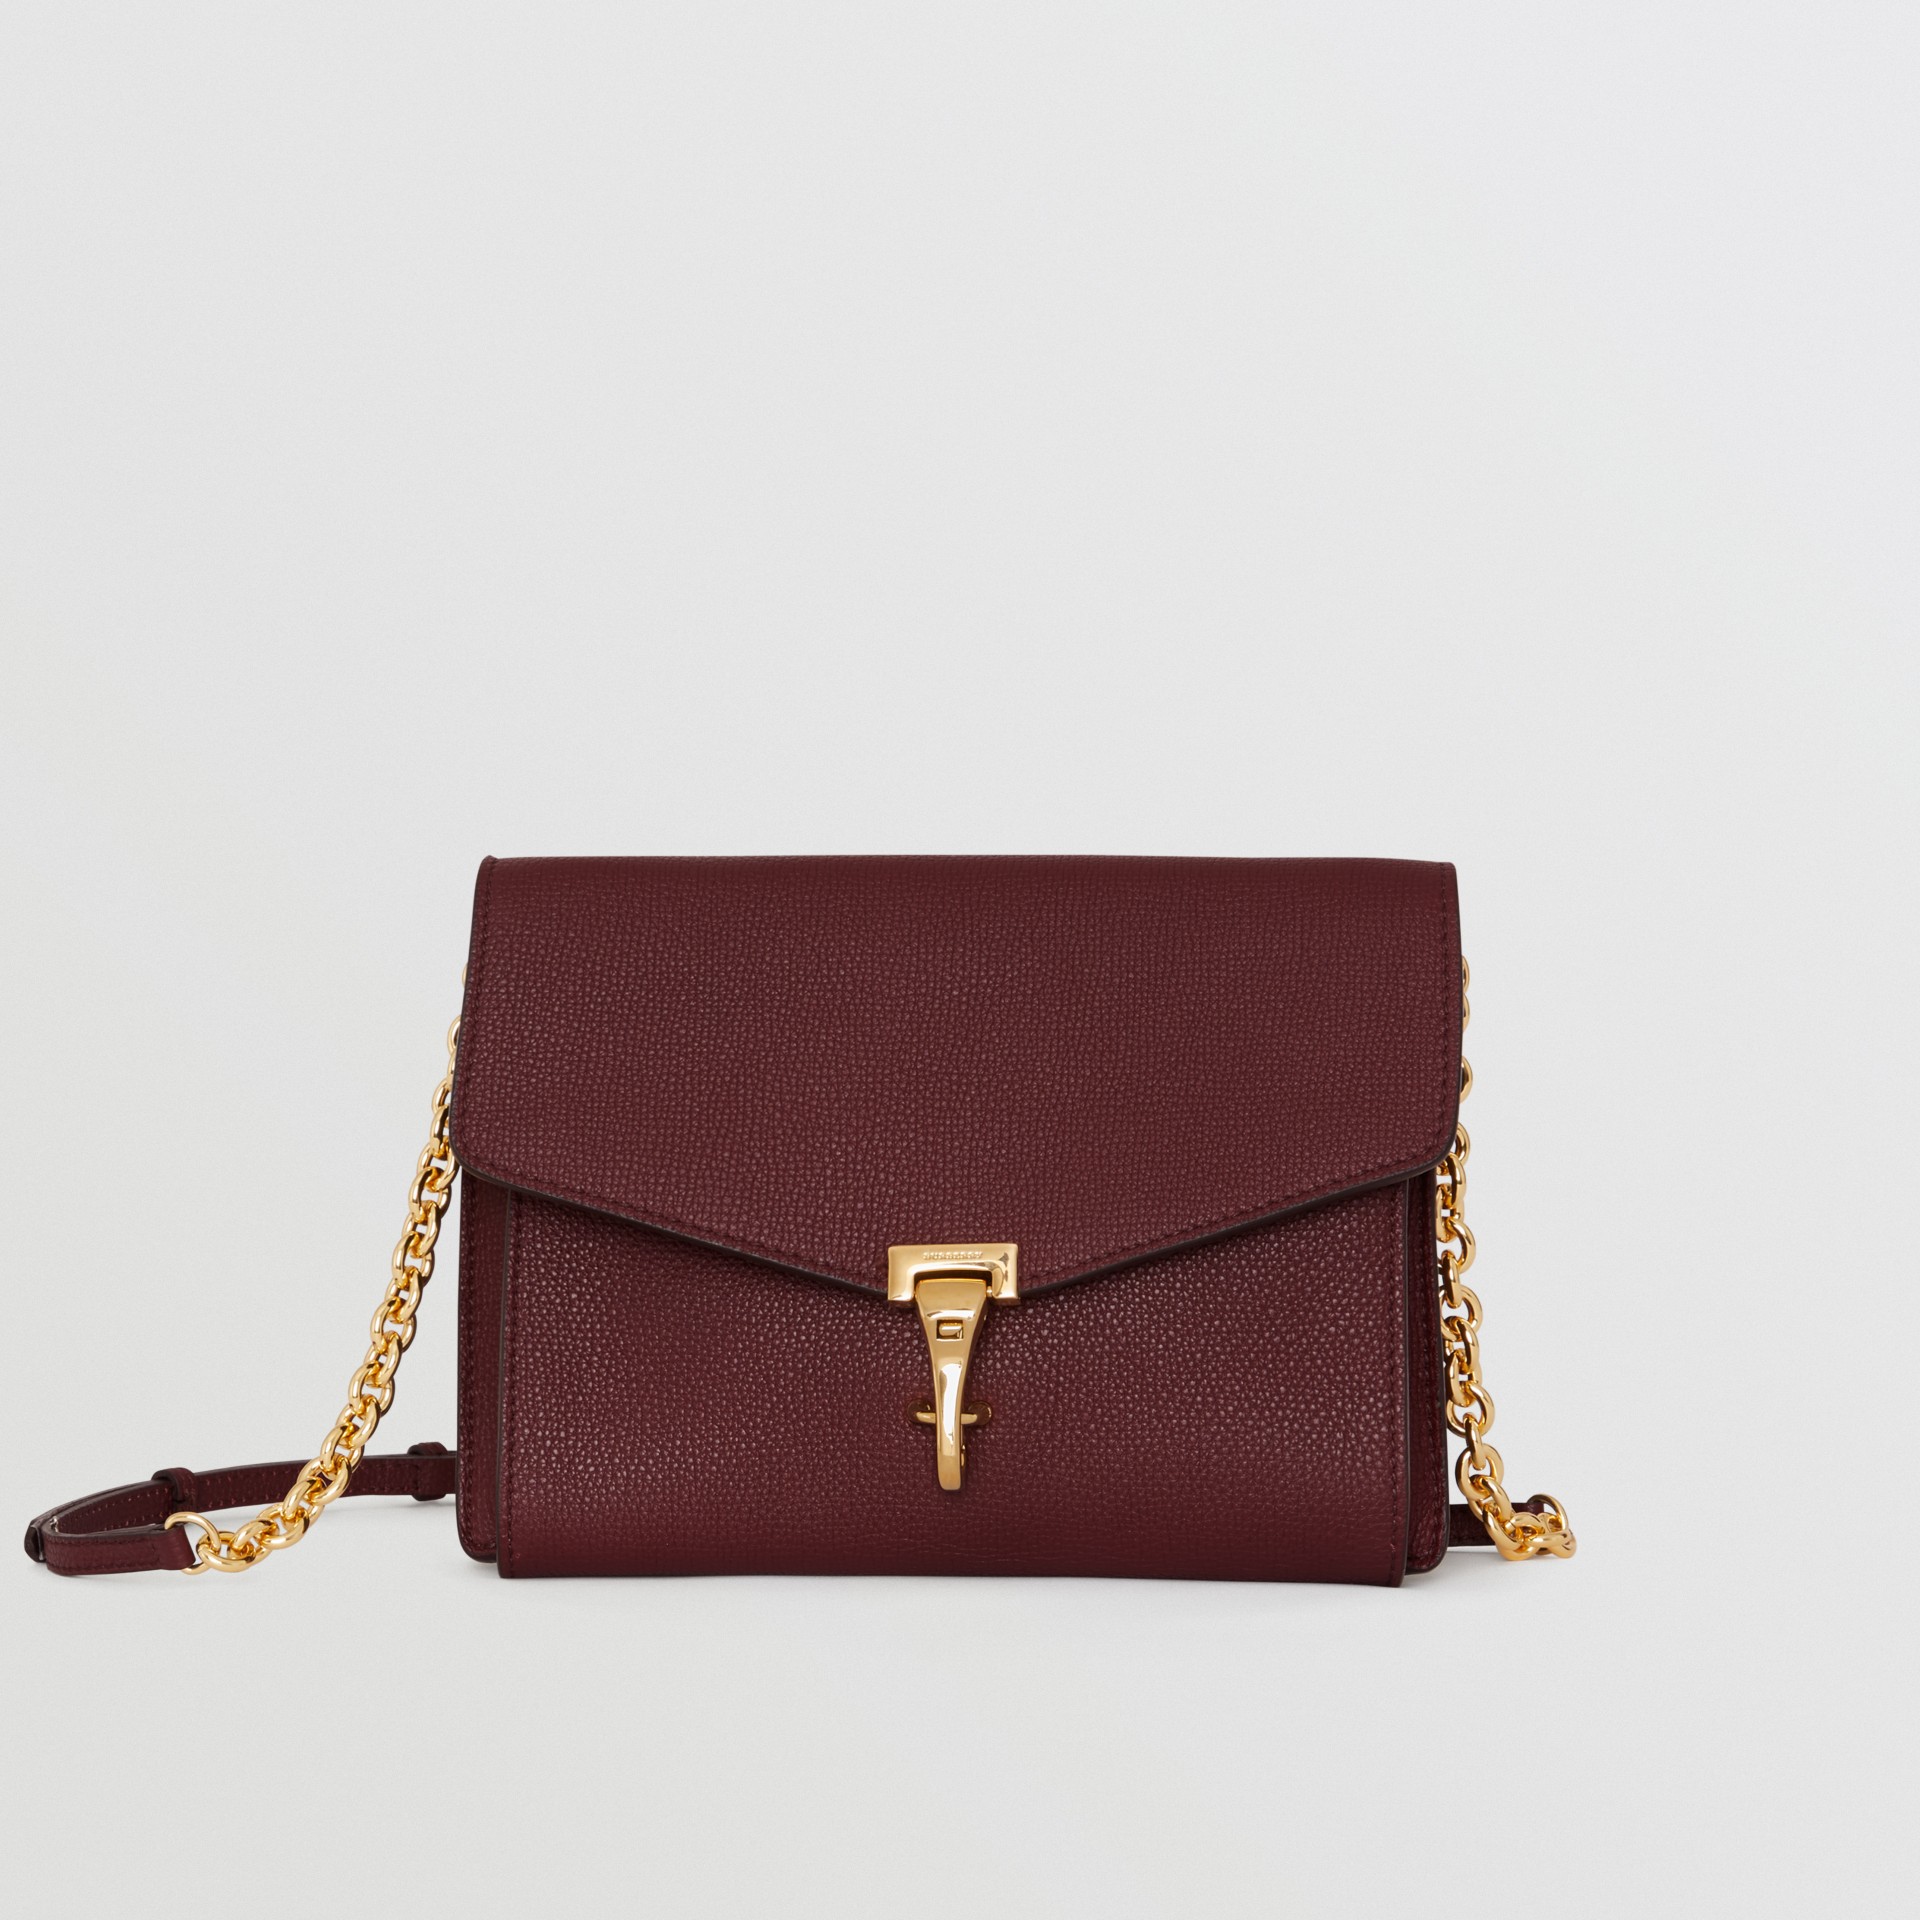 Small Leather Crossbody Bag in Mahogany Red - Women | Burberry United ...